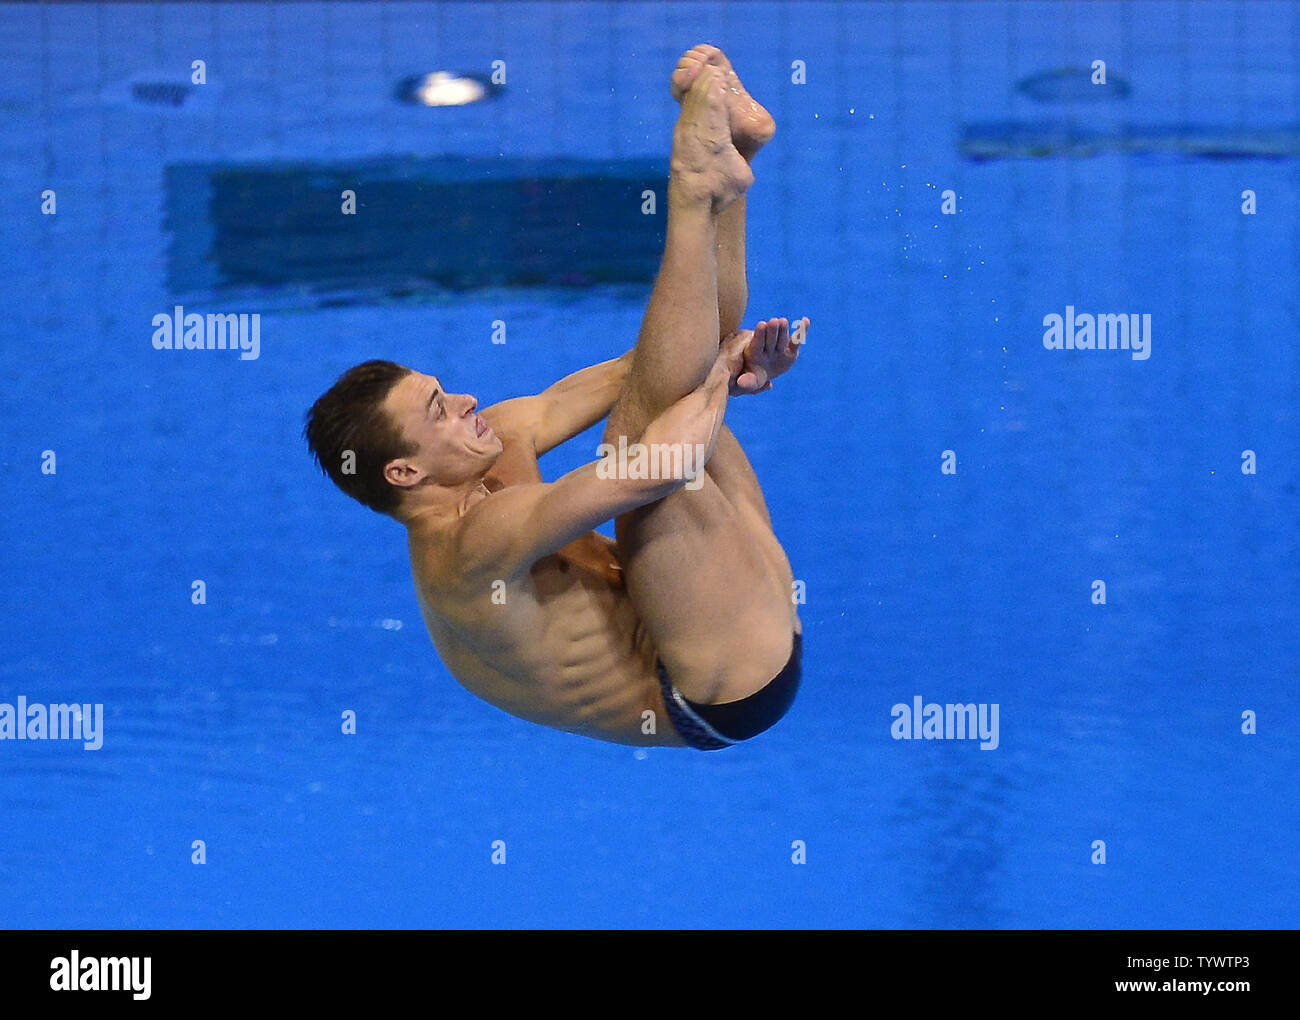 Troy Dumais of the United States of America competes in the Men's 3m Springboard Diving competition at the London 2012 Summer Olympics on August 7, 2012 in London.   UPI/Ron Sachs Stock Photo